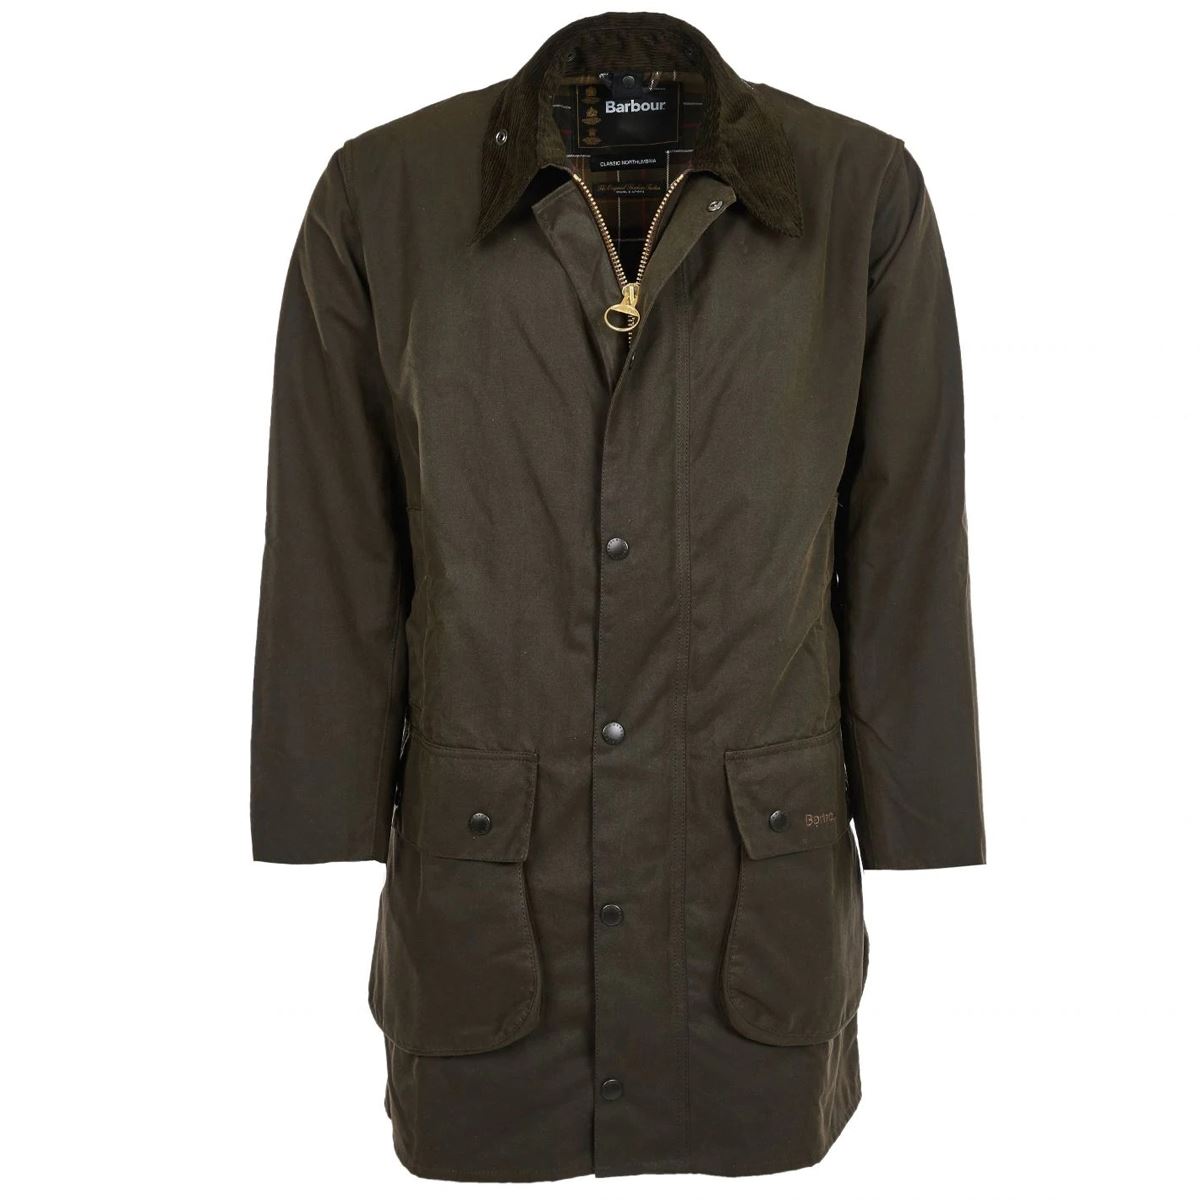 What is the material of the Barbour Northumbria Wax Jacket?